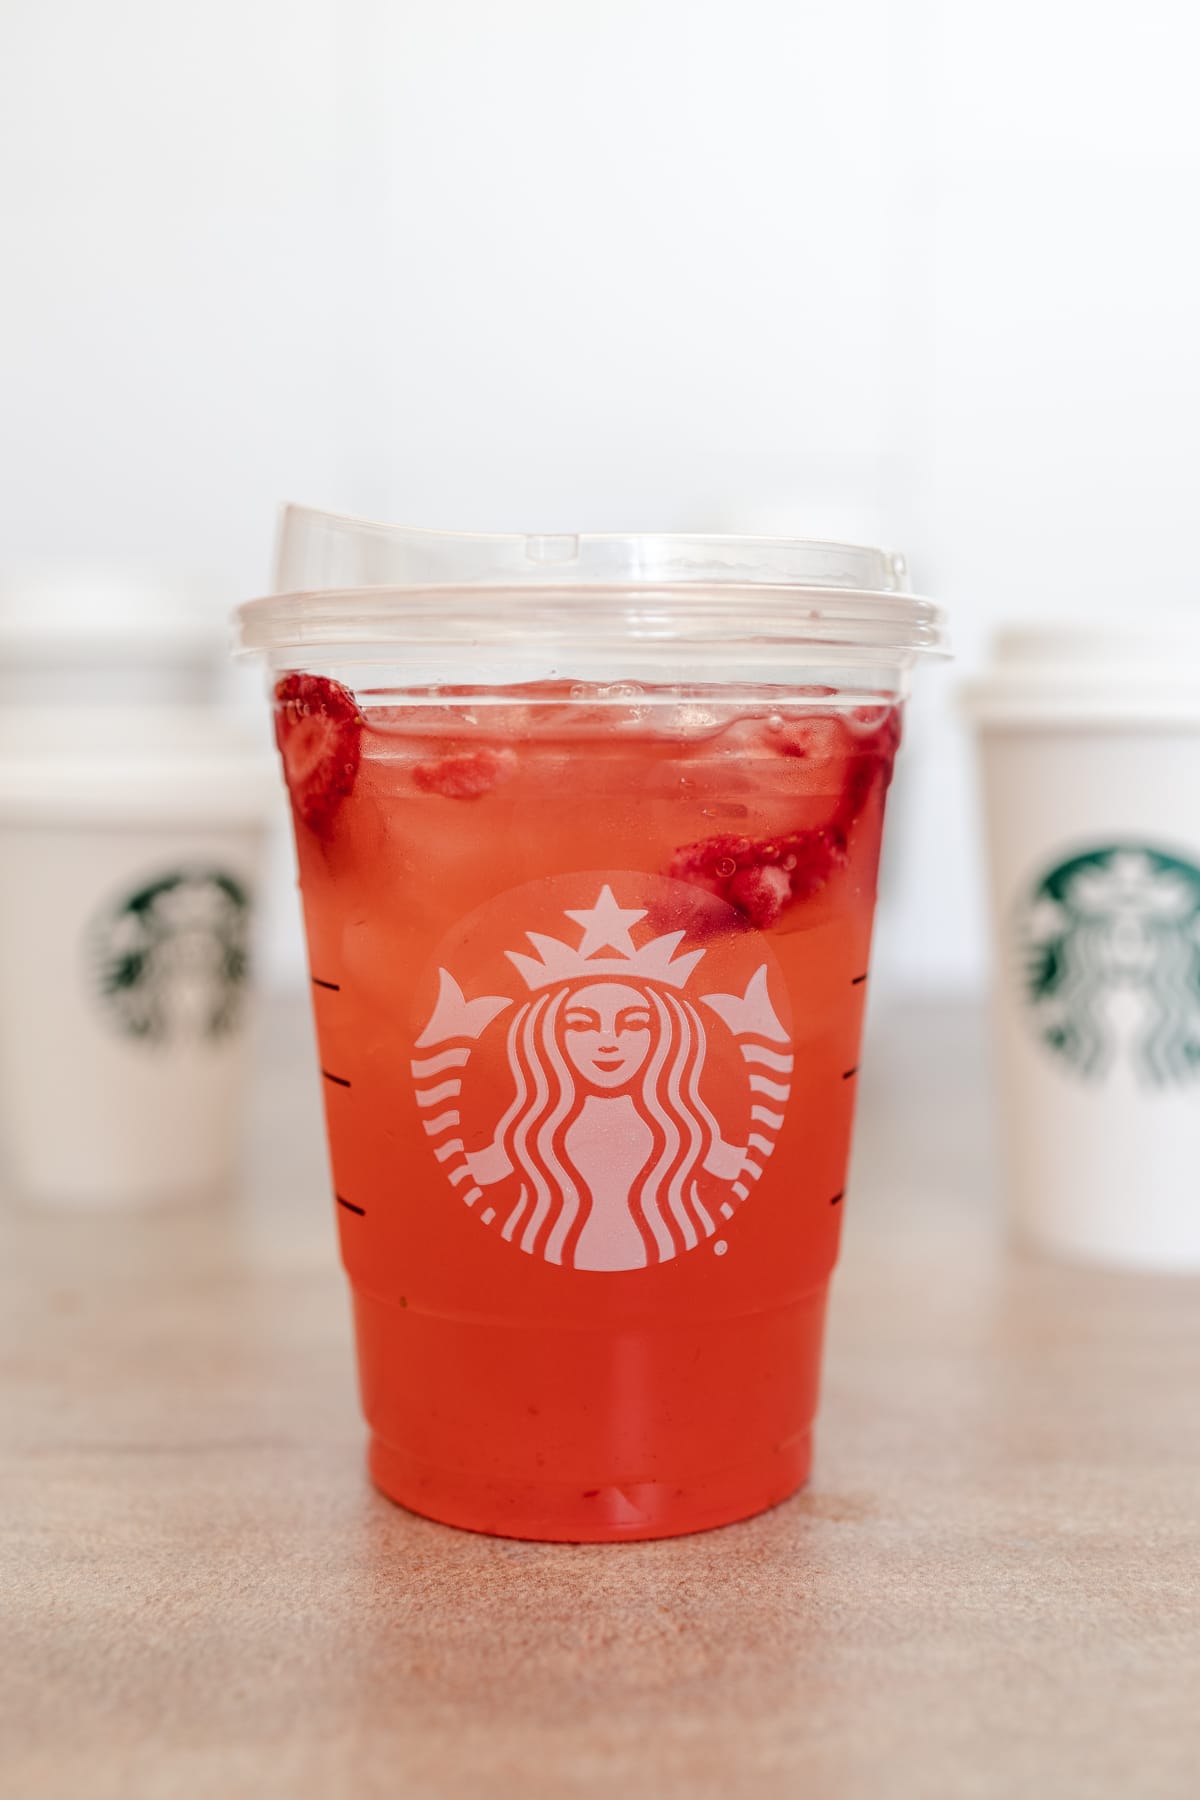 Strawberry refresher in a disposable plastic cup.